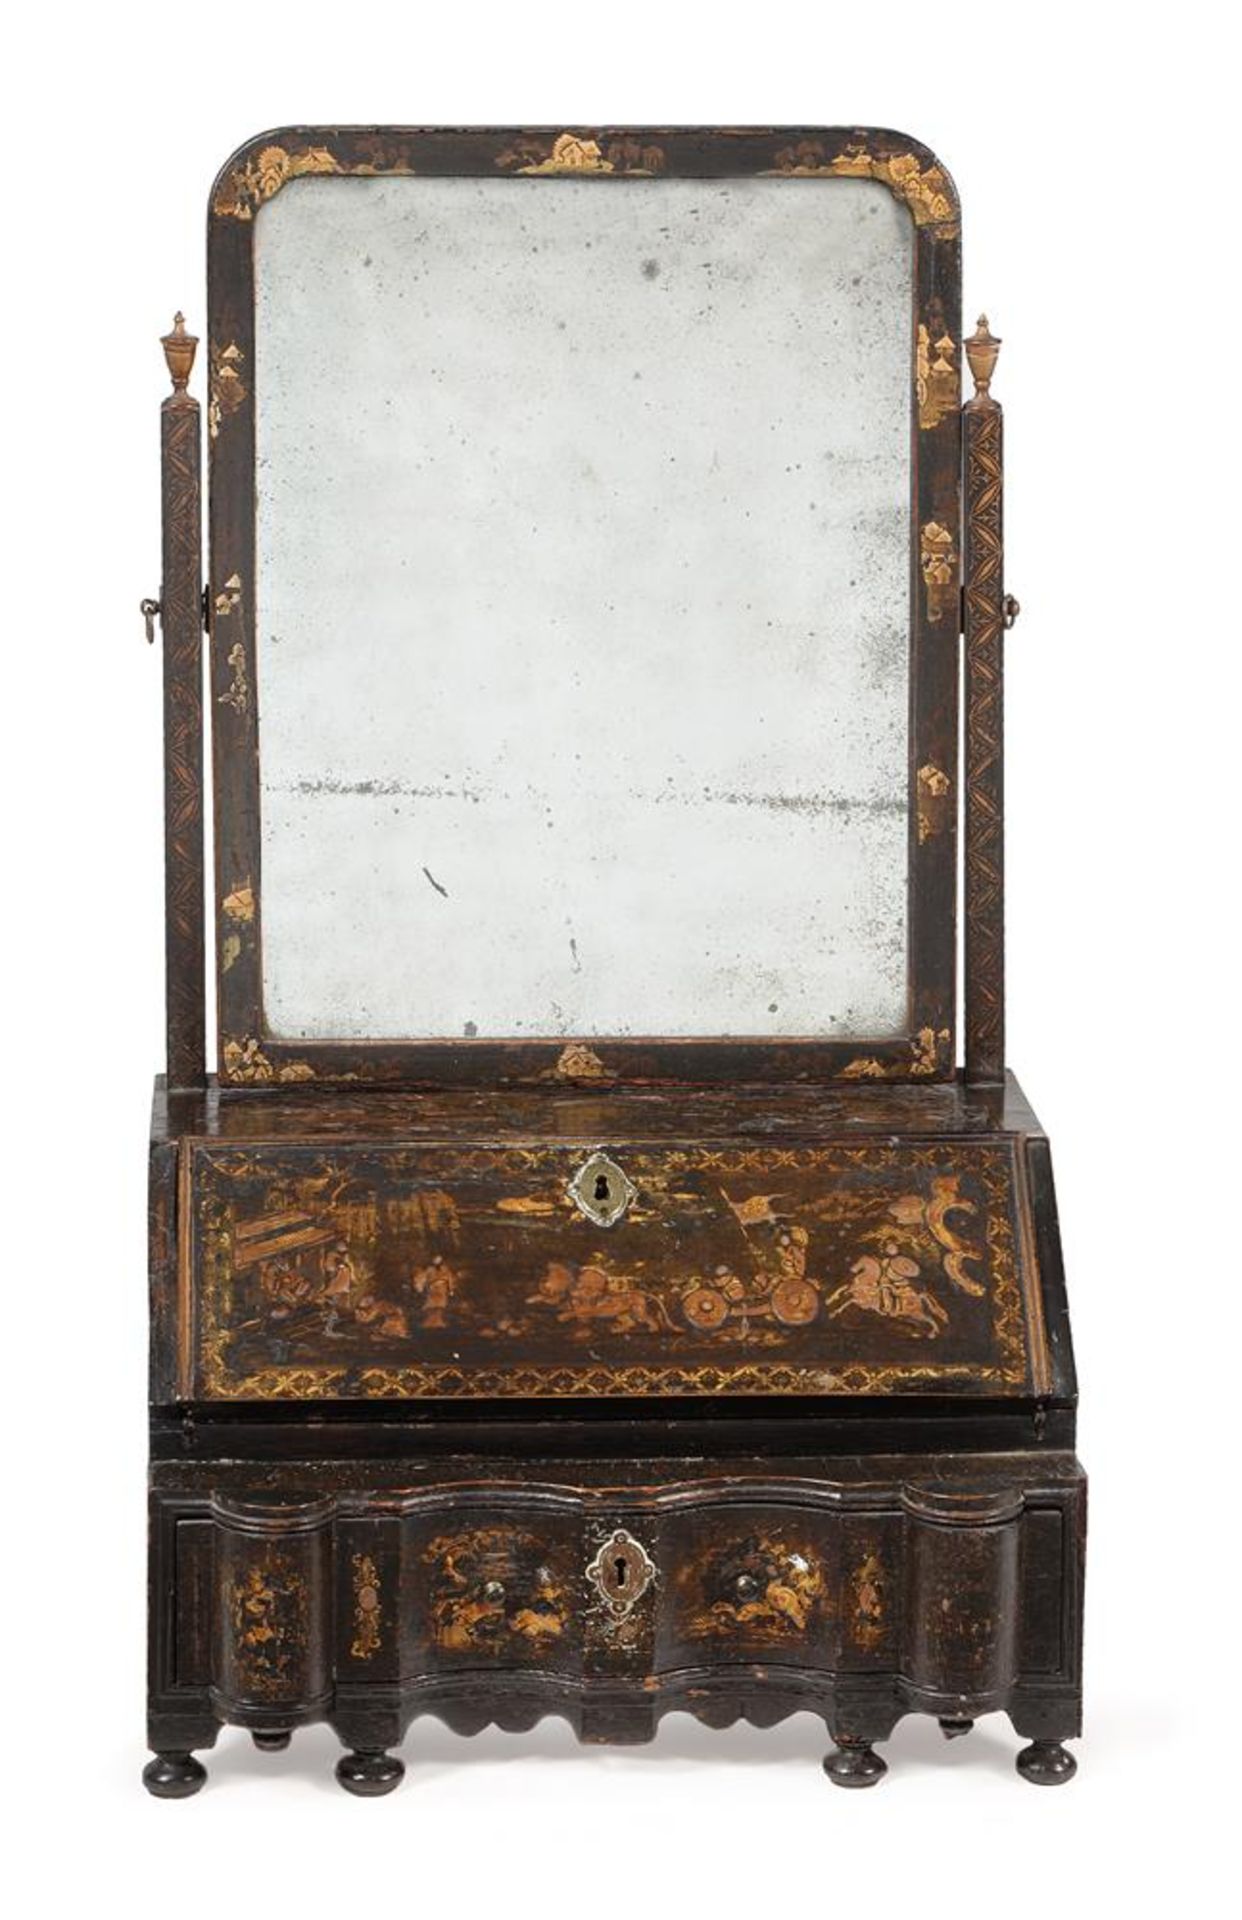 A QUEEN ANNE BLACK AND GILT JAPANNED DRESSING MIRROR, CIRCA 1710 - Image 2 of 9